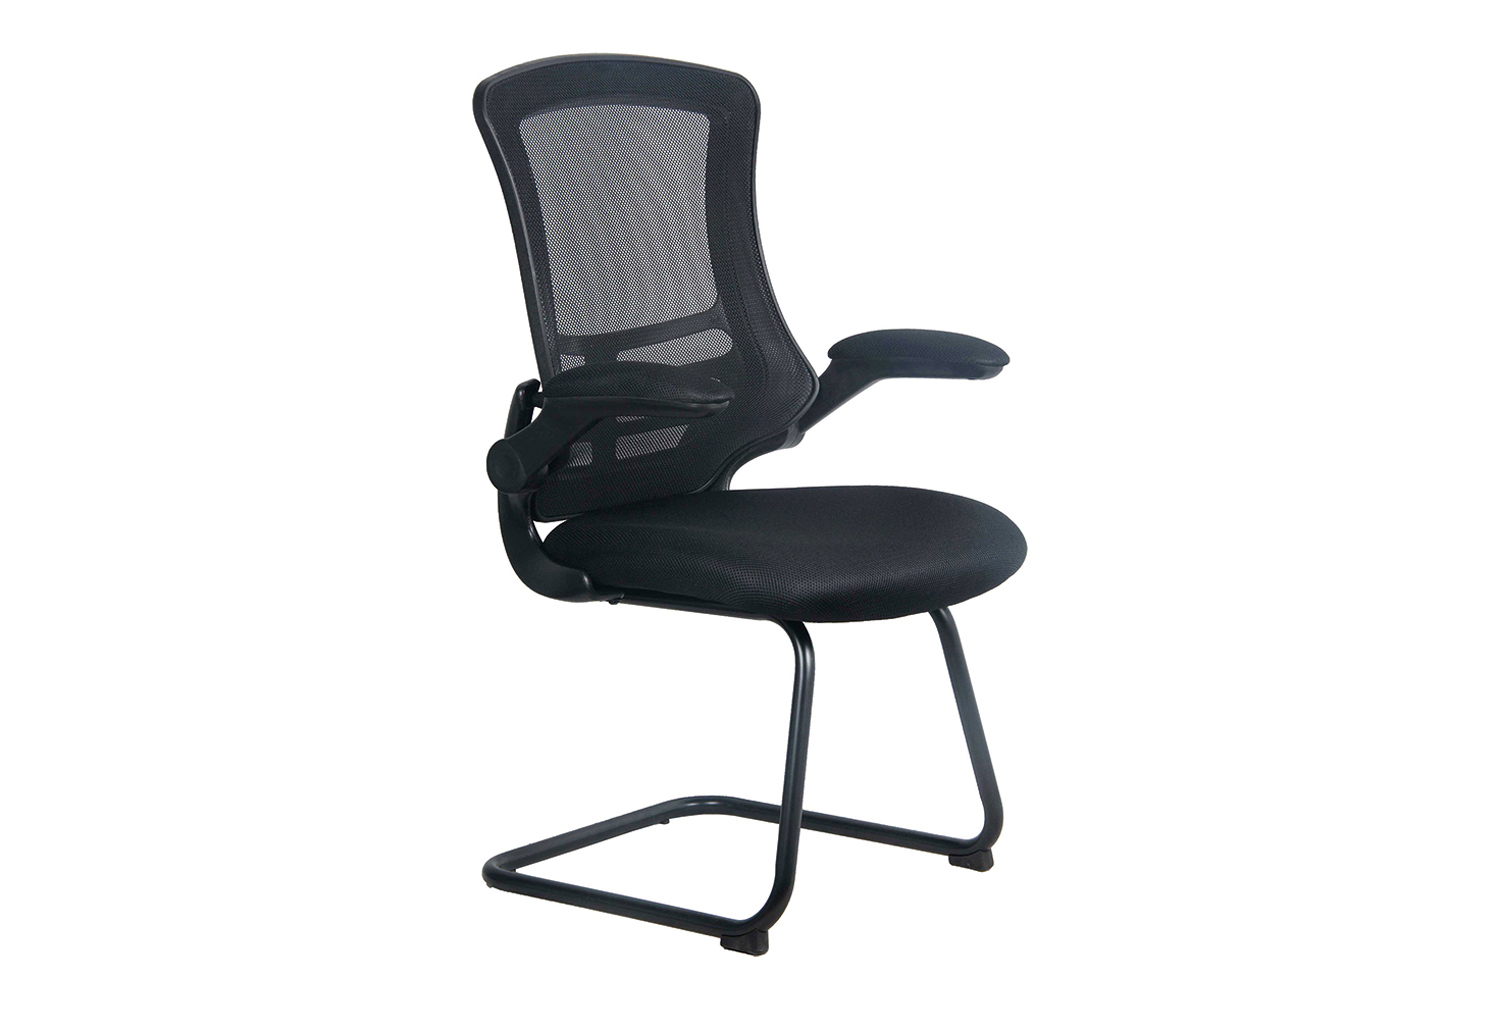 Moon Mesh Back Visitor Office Chair With Black Frame (Black), Express Delivery